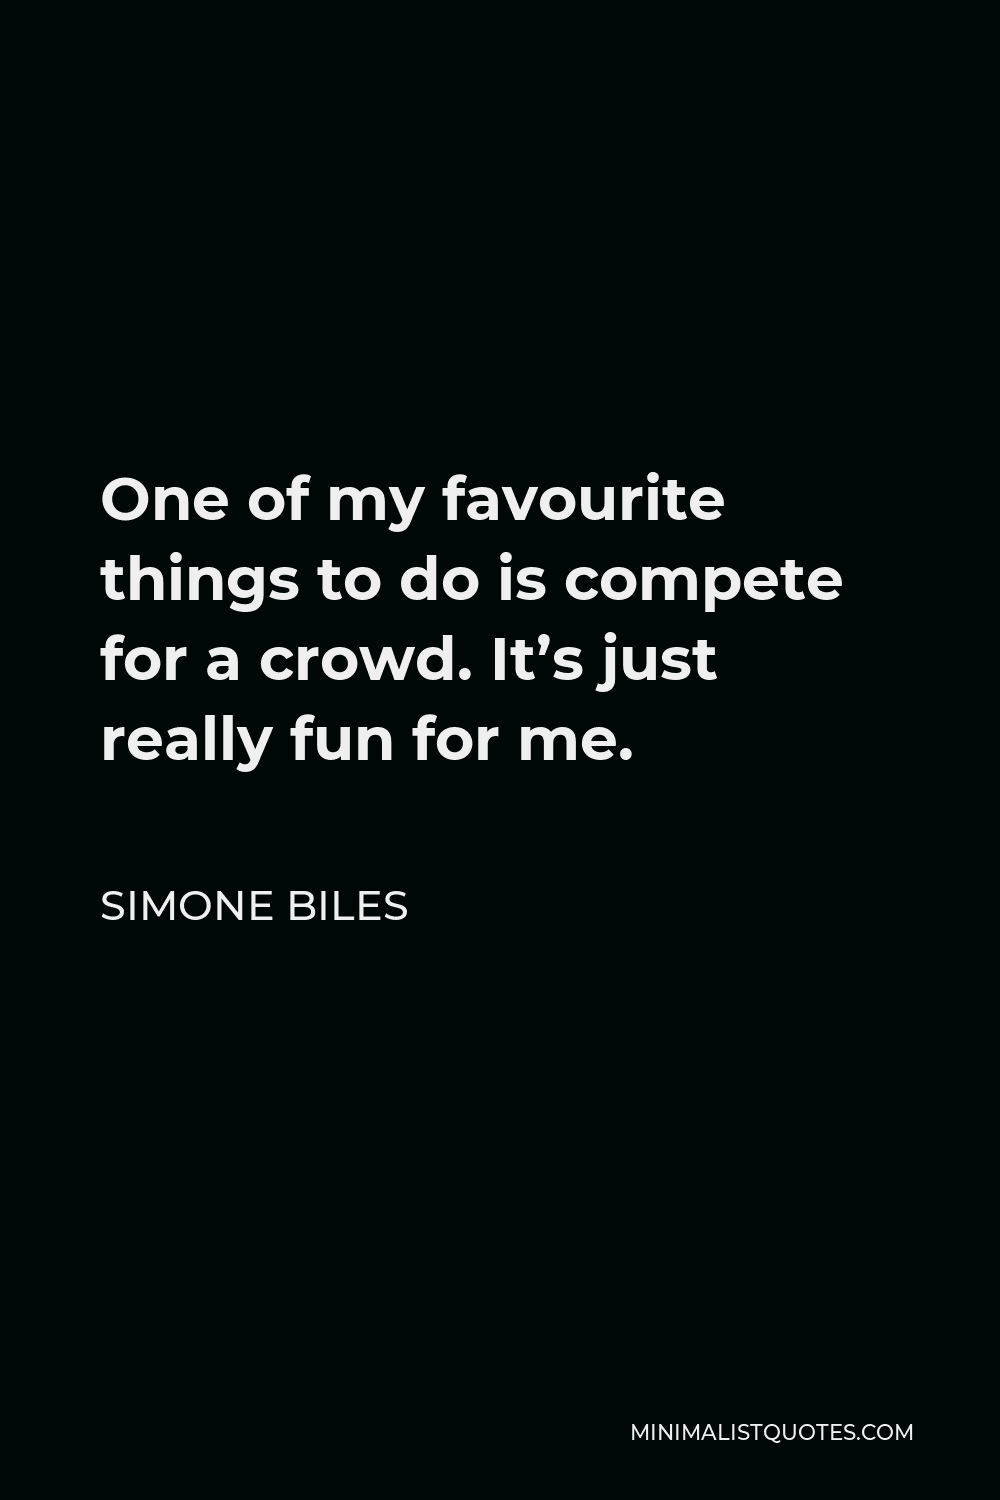 Simone Biles Quote - One of my favourite things to do is compete for a crowd. It’s just really fun for me.